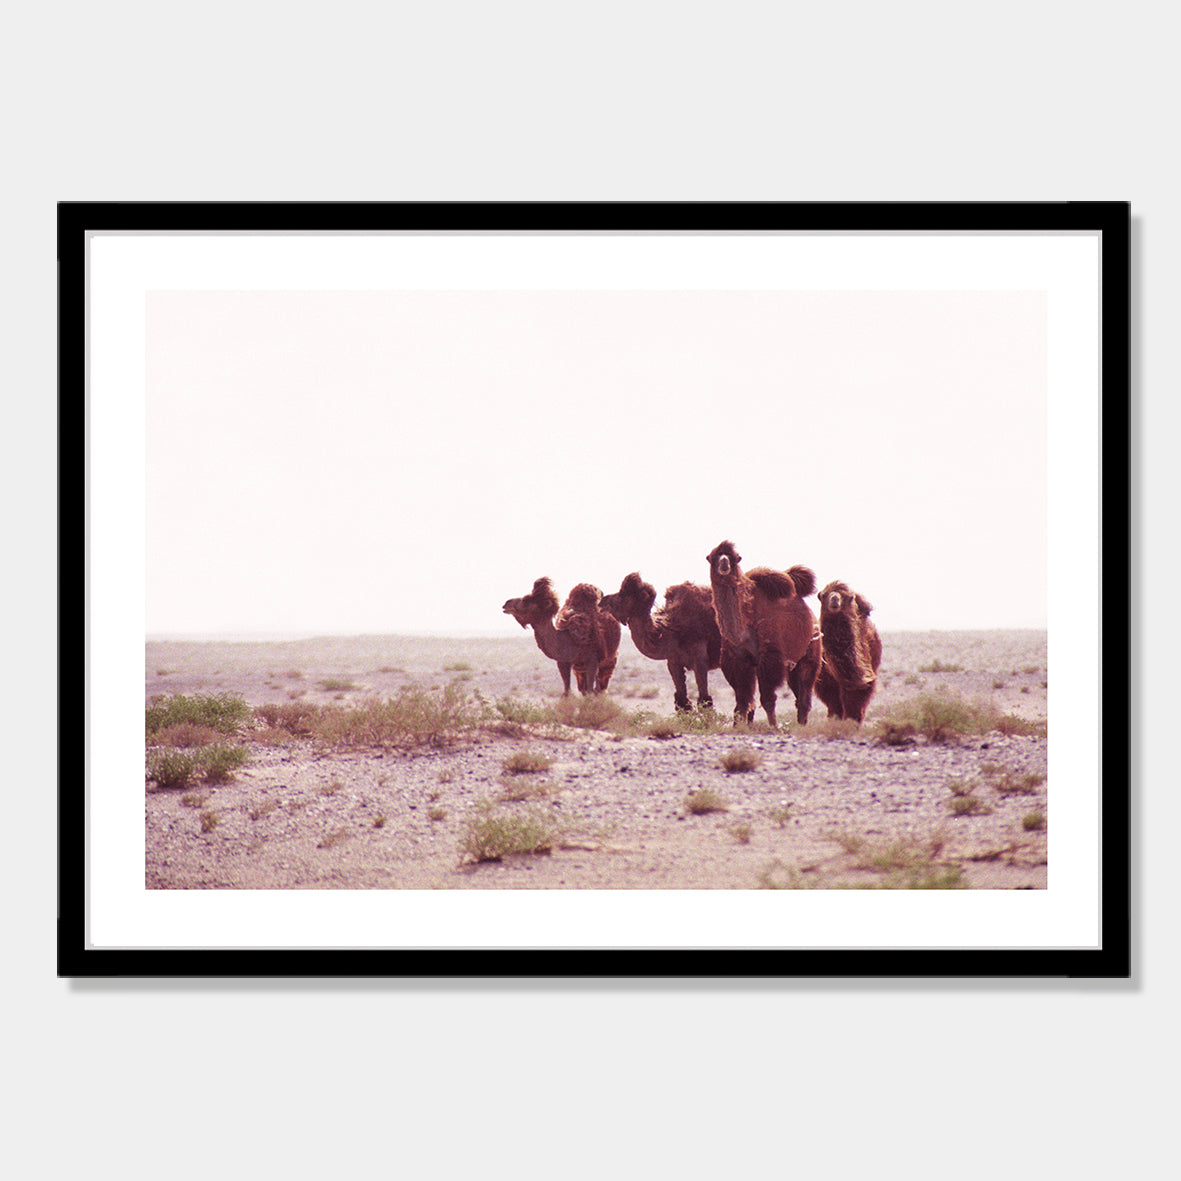 Photographic art print of Camels in the Gobi Desert, China by Bon Jung. Printed in New Zealand by endemicworld framed in black.